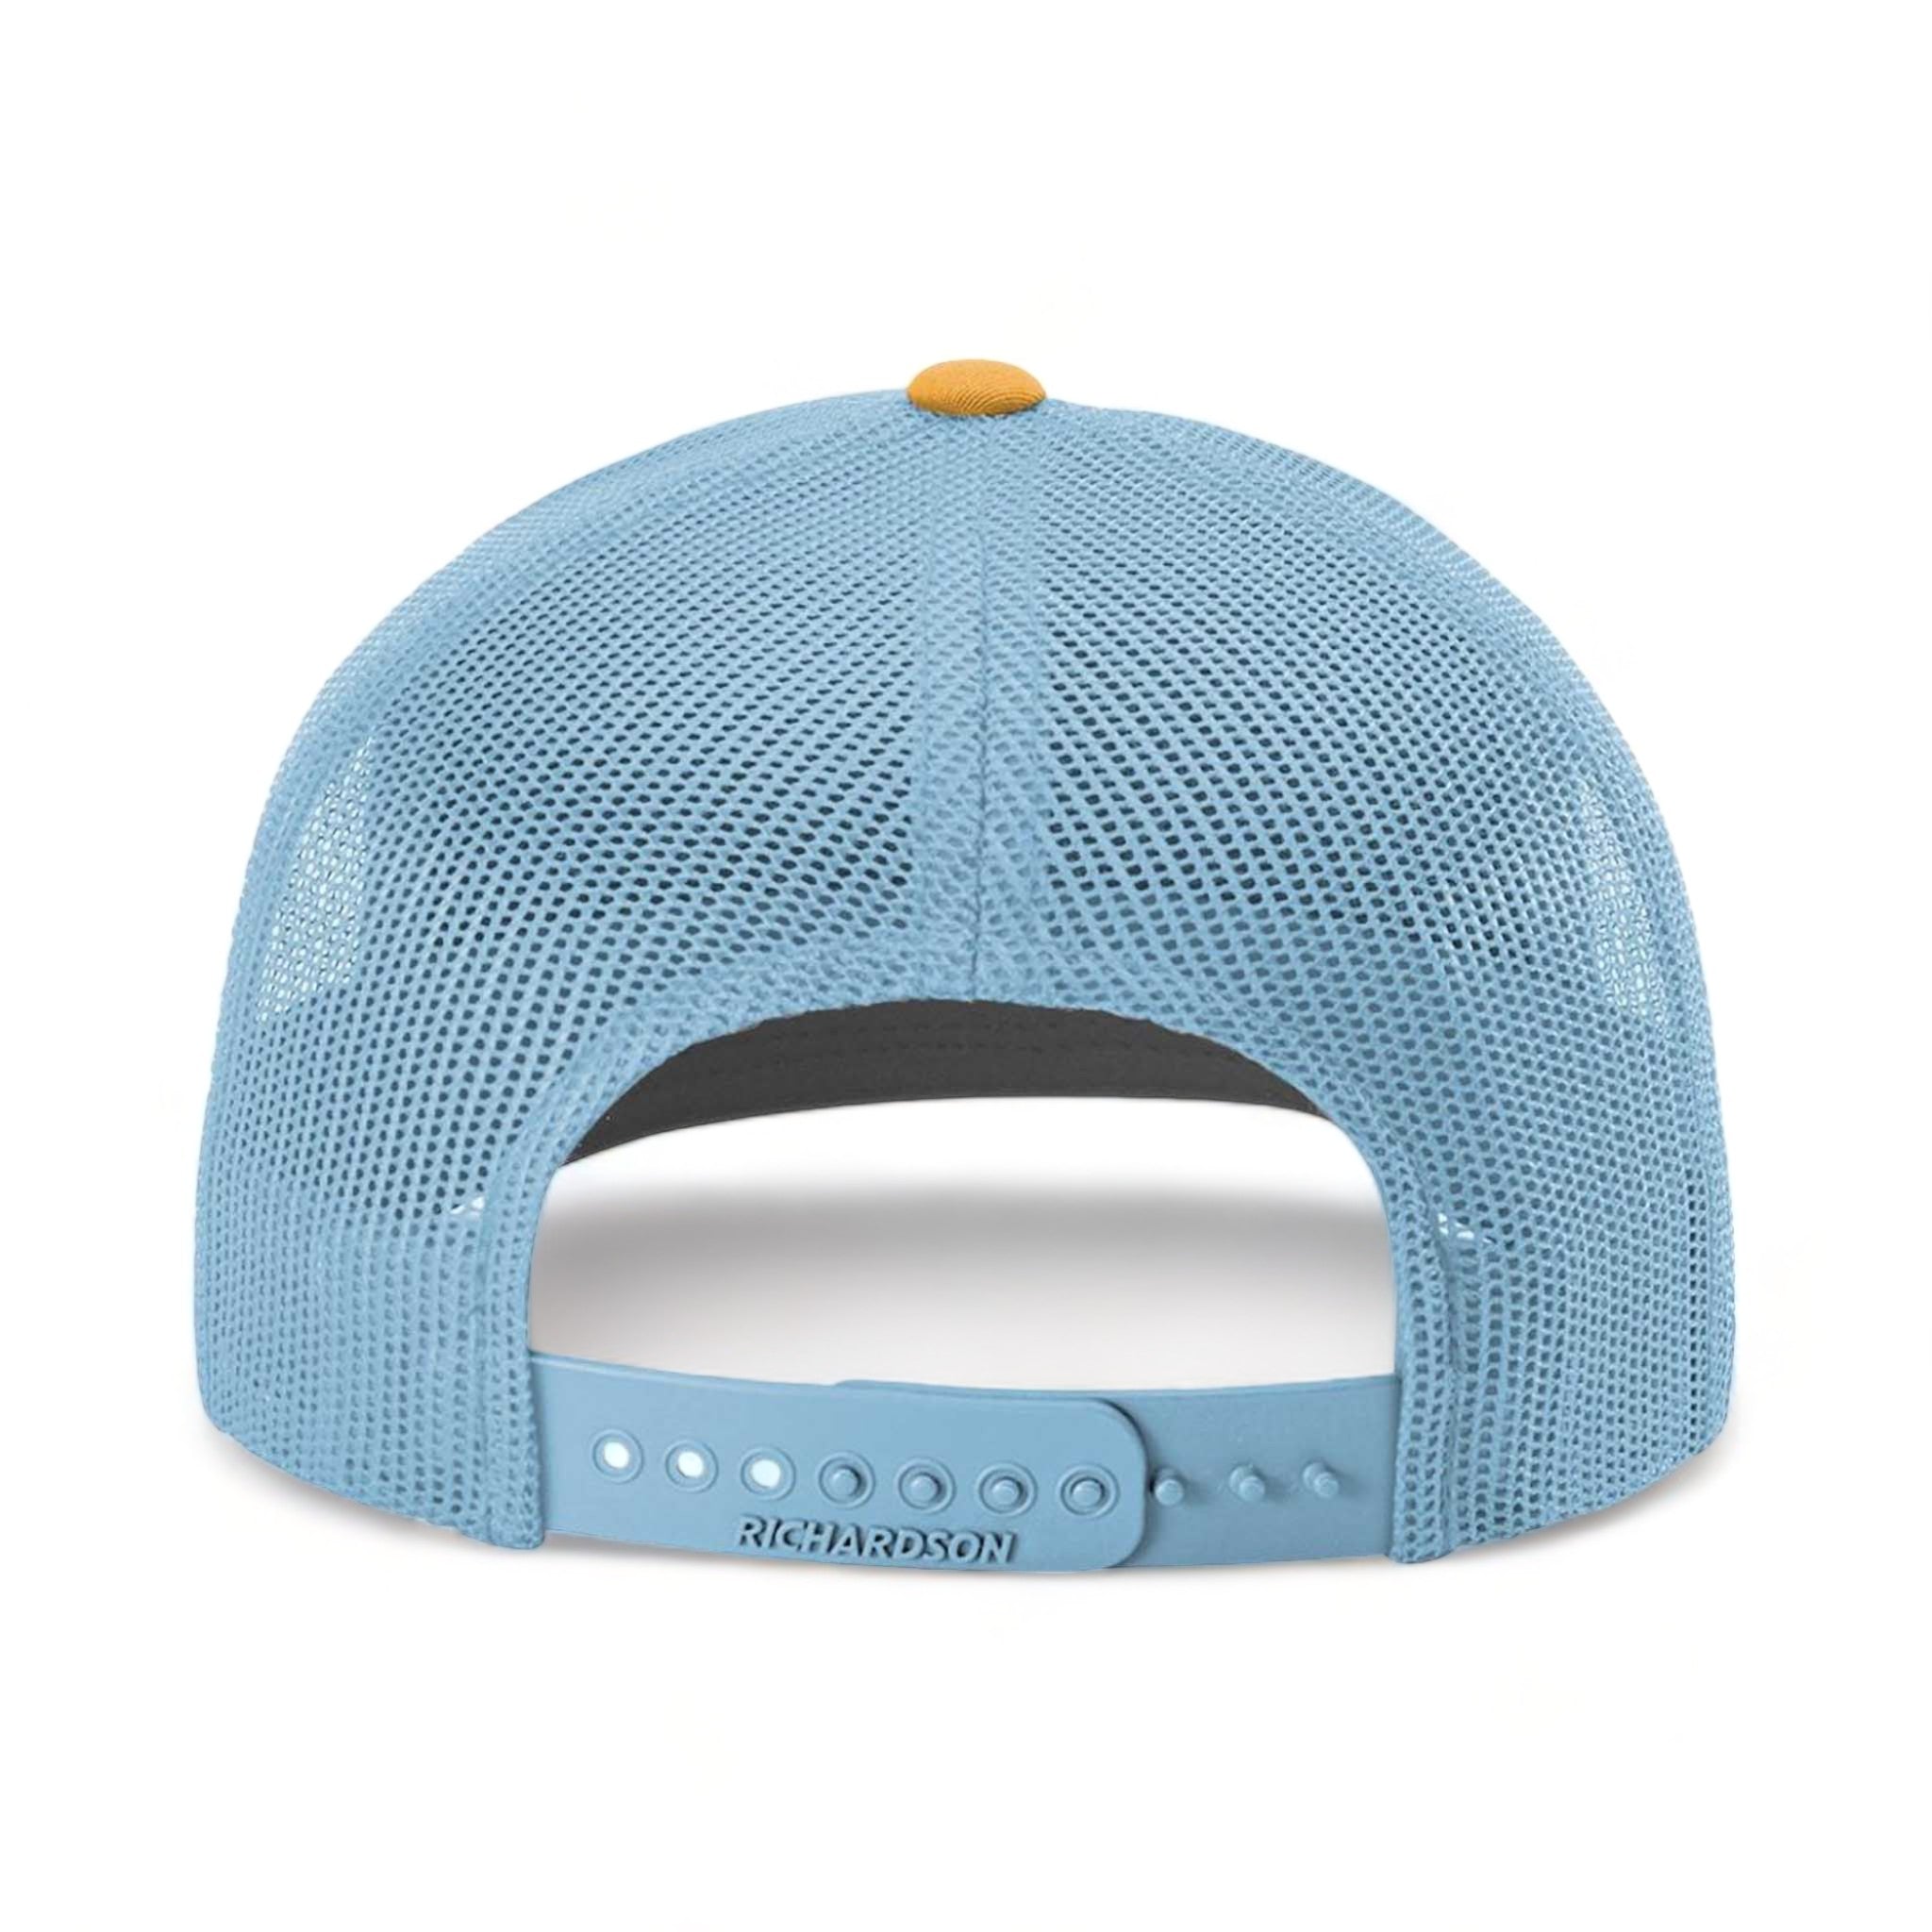 Back view of Richardson 112 custom hat in white, columbia blue and yellow